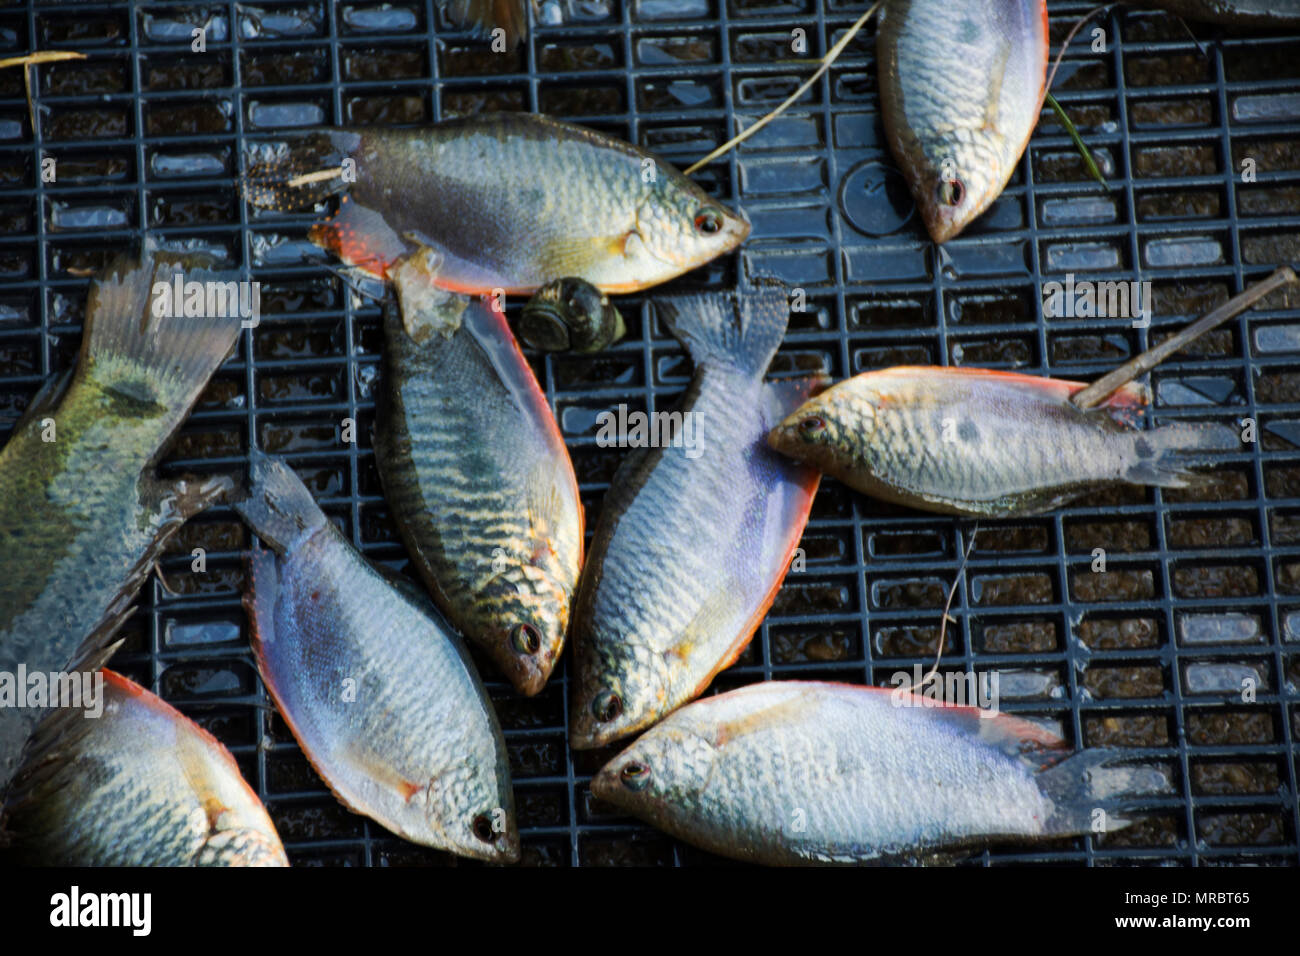 Thai people catch Moonlight gourami fish and Climbing gourami put down in plastic basket at countryside of Thailand Stock Photo